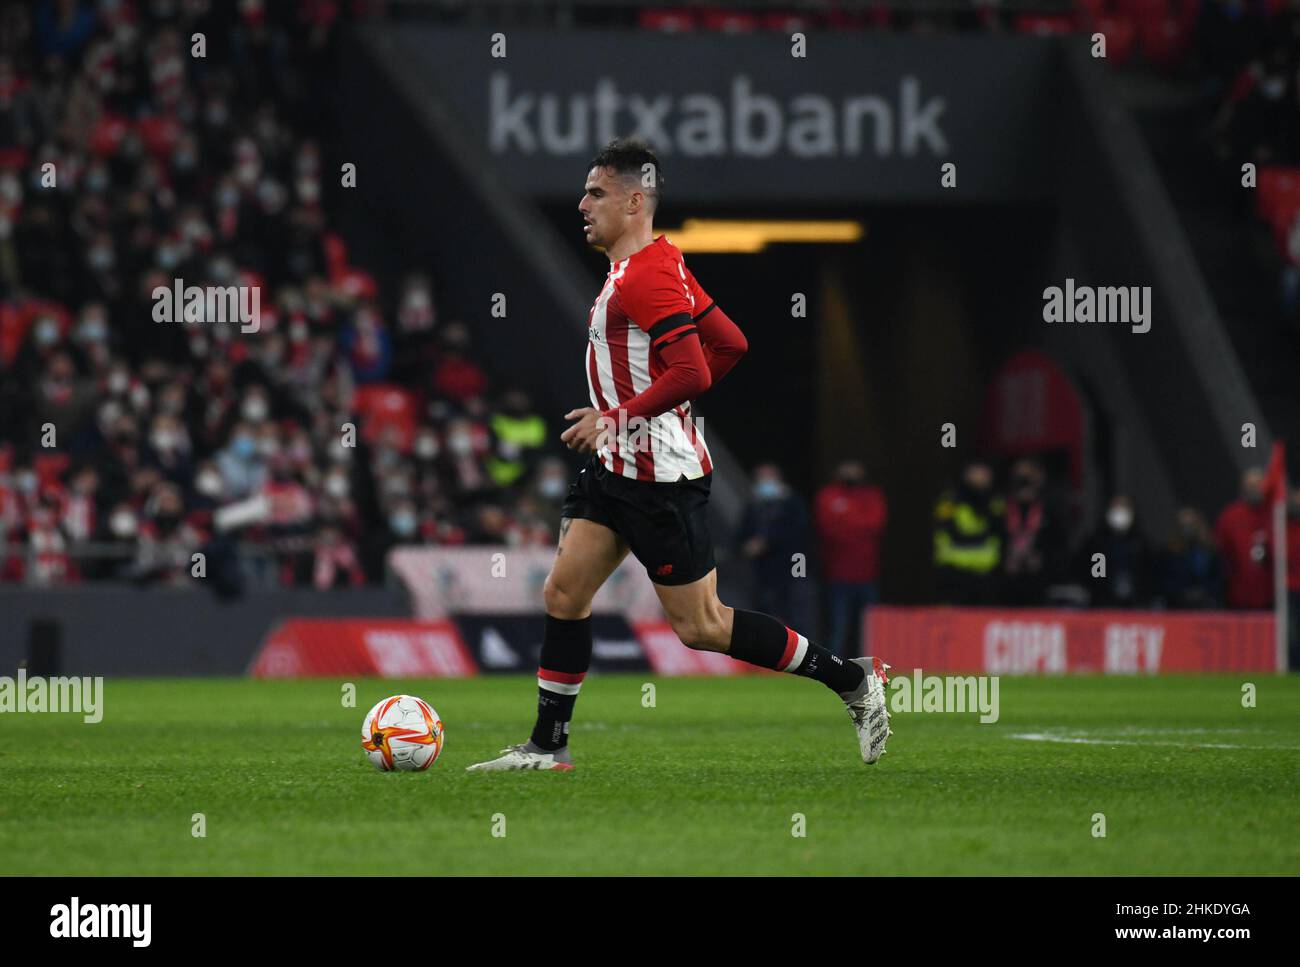 BILBAO, SPAIN - FEBRUARY 3: Dani Garcia of Athletic Bilbao controls the ball during the Copa del Rey quarterfinals match between Athletic Bilbao and Real Madri at San Mamés Stadium on February 3, 2022 in Bilbao, Spain. (Photo by Sara Aribó/PxImages) Stock Photo